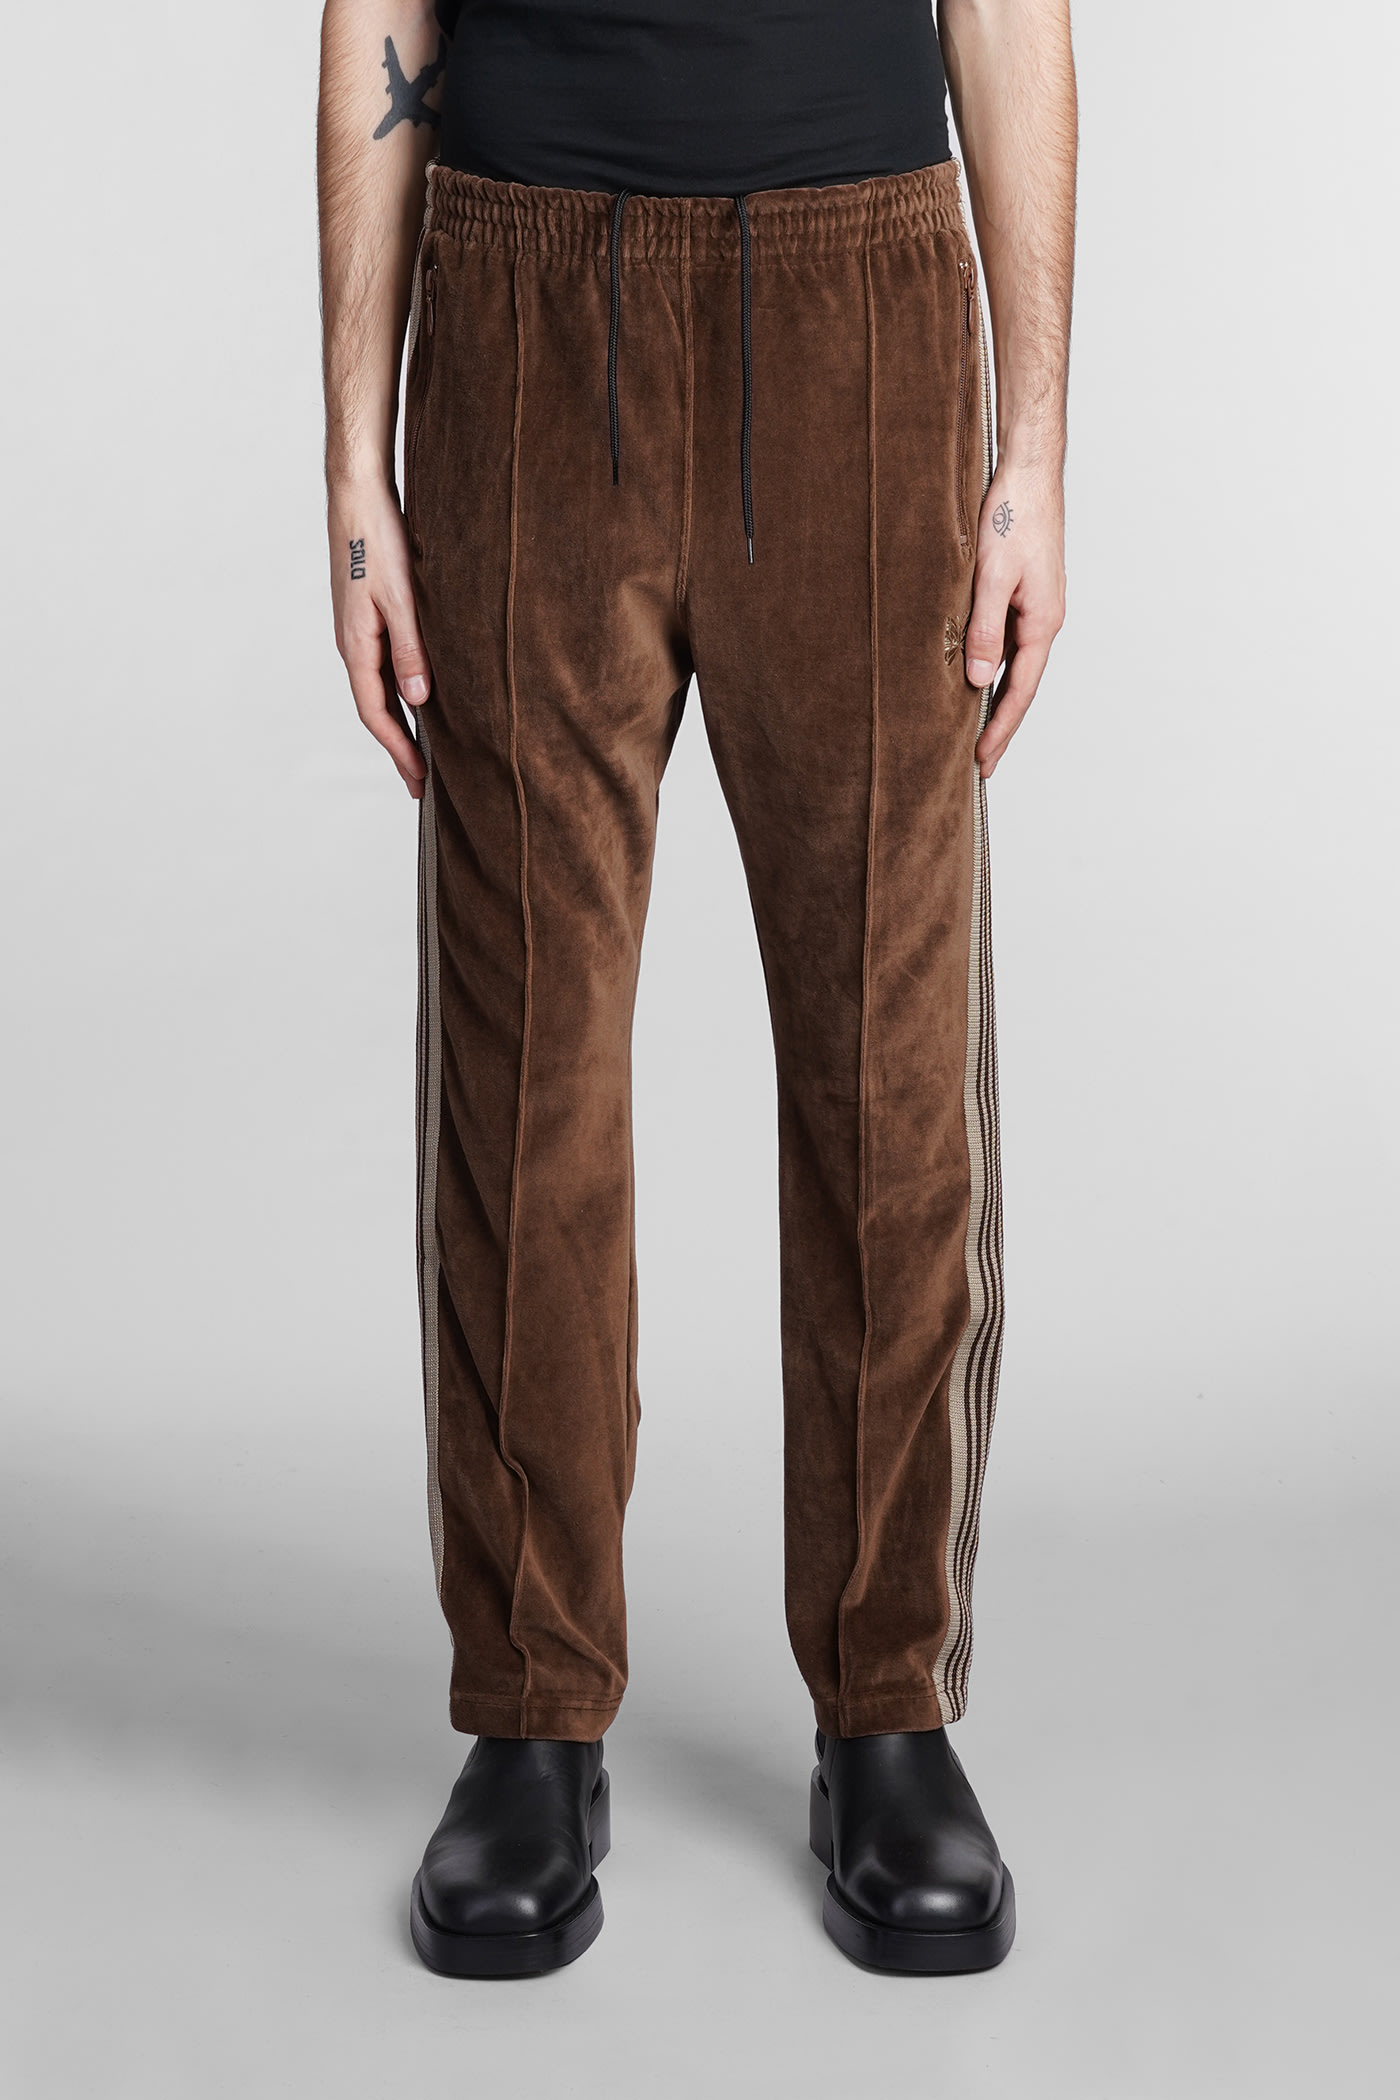 Needles Pants In Brown Cotton